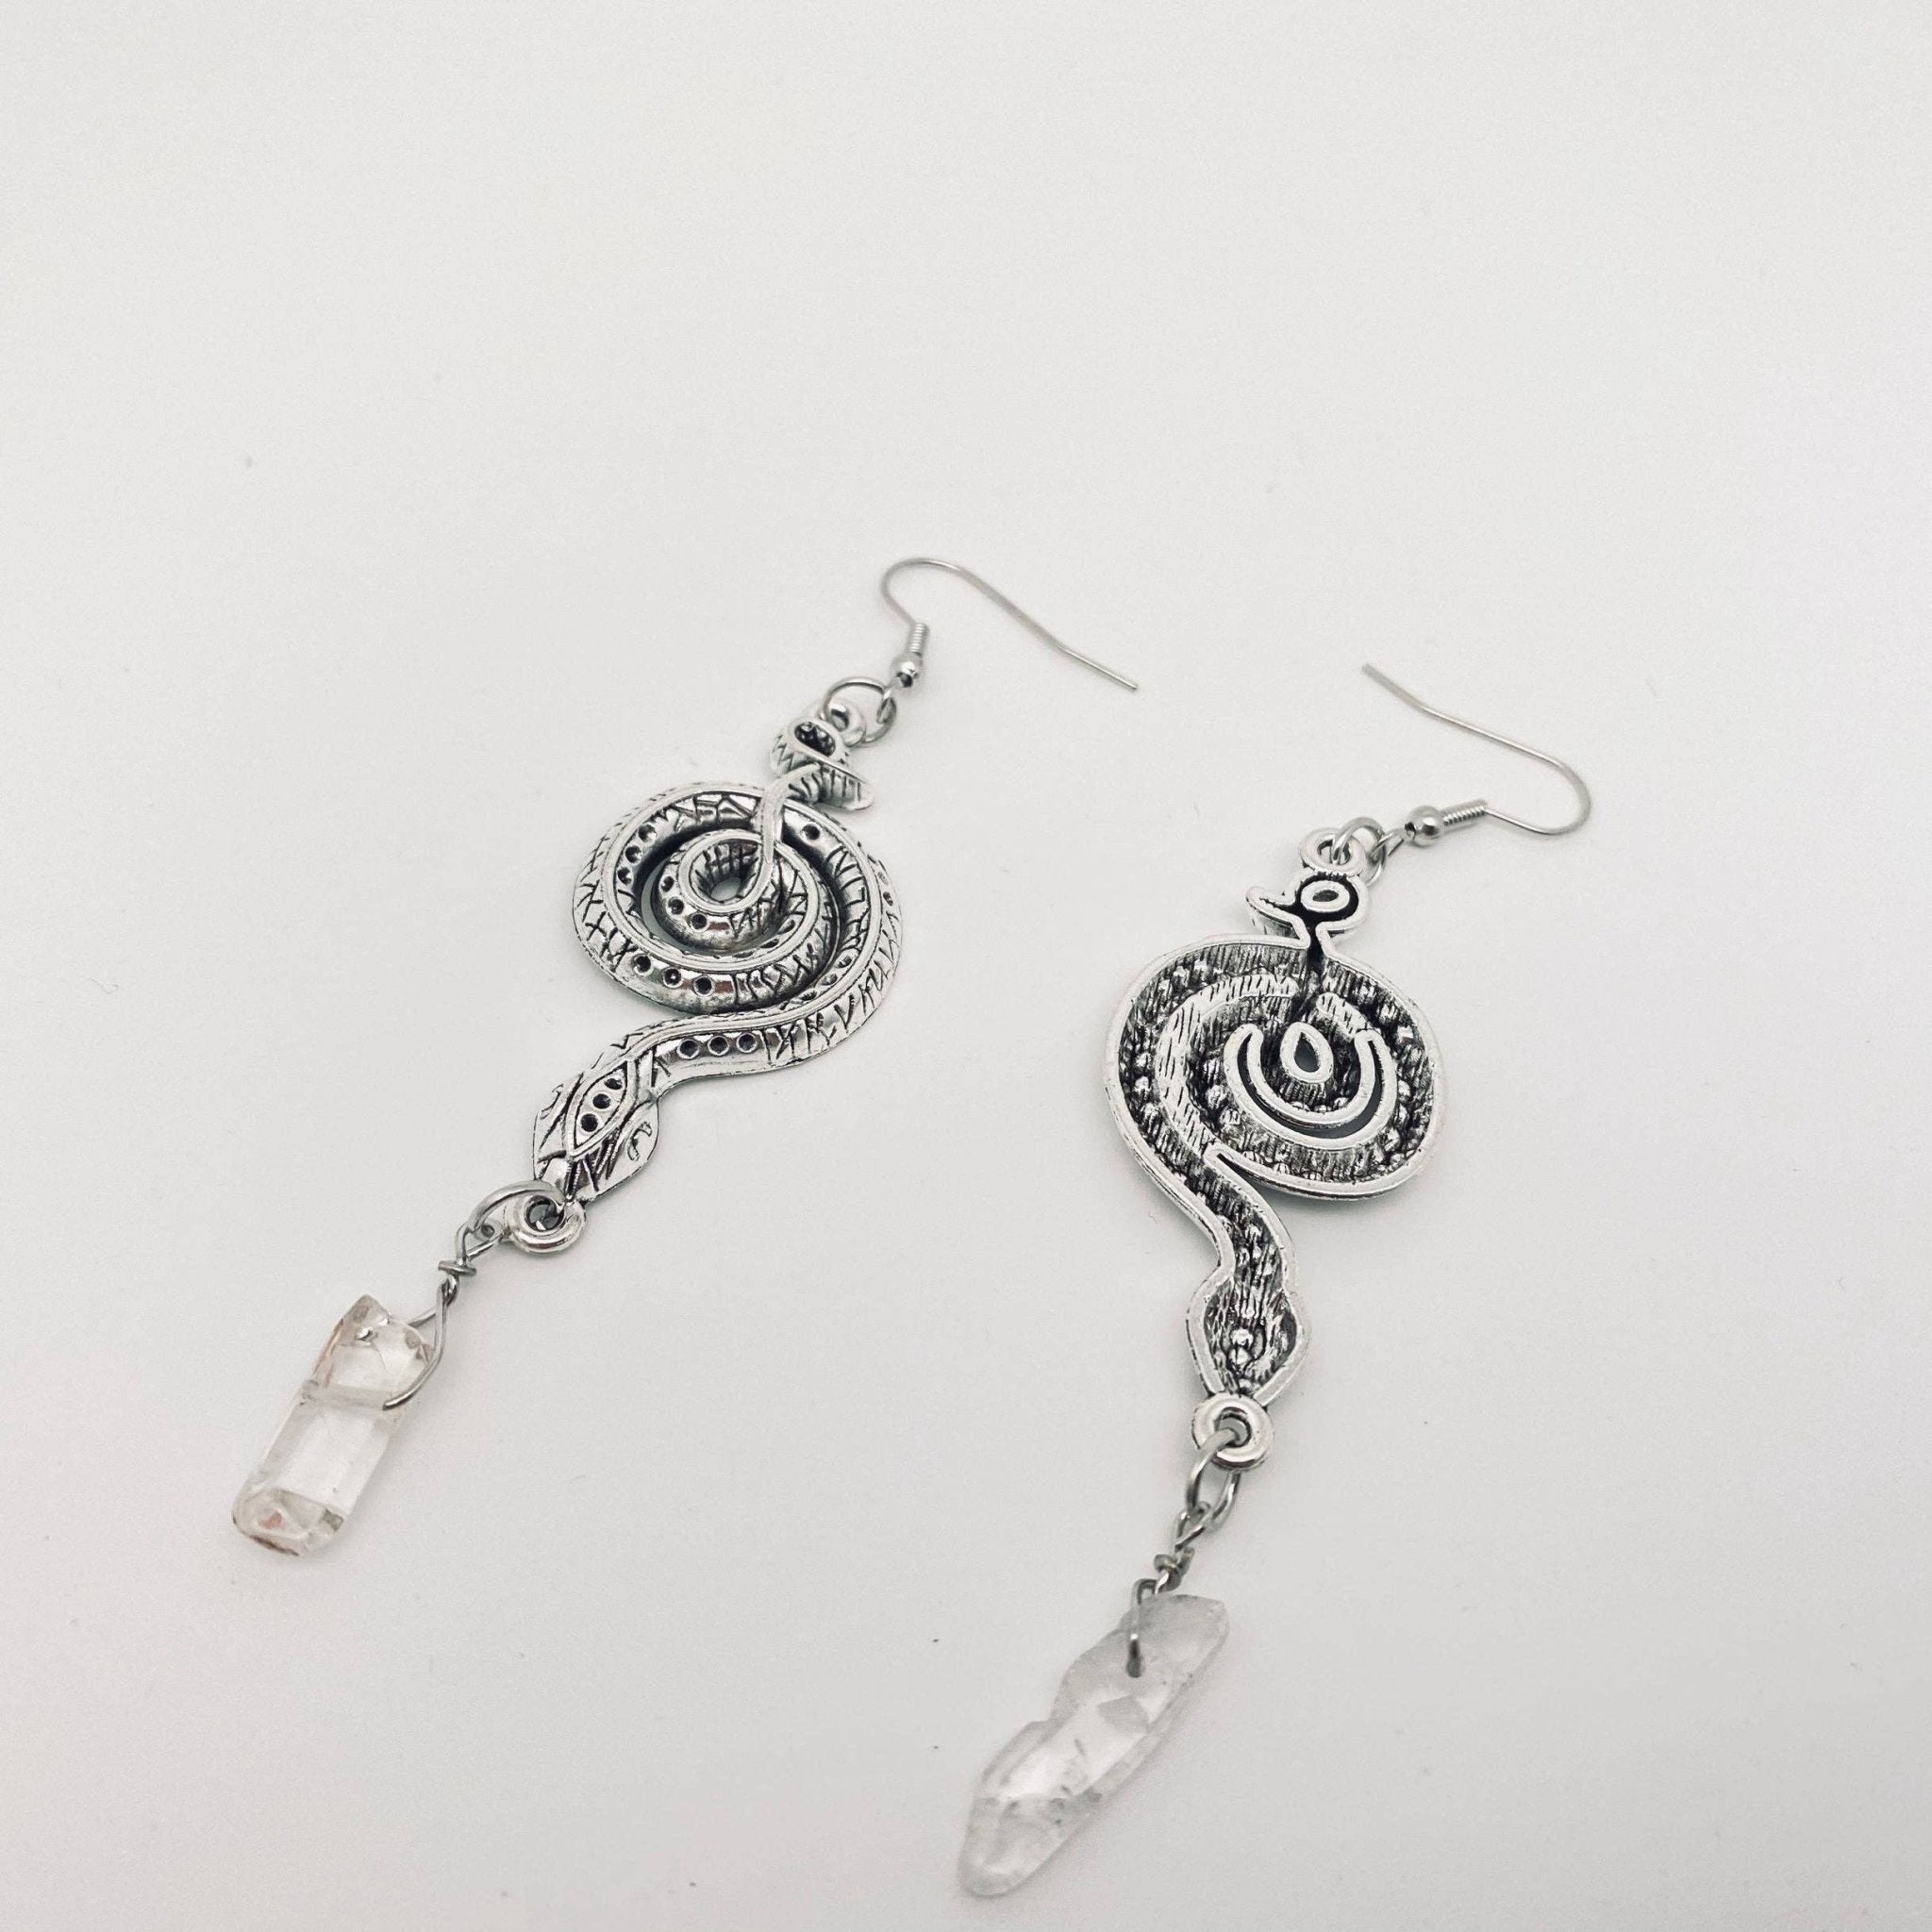 Gothic Vintage Snake Crystal Earrings - Spiral Circle